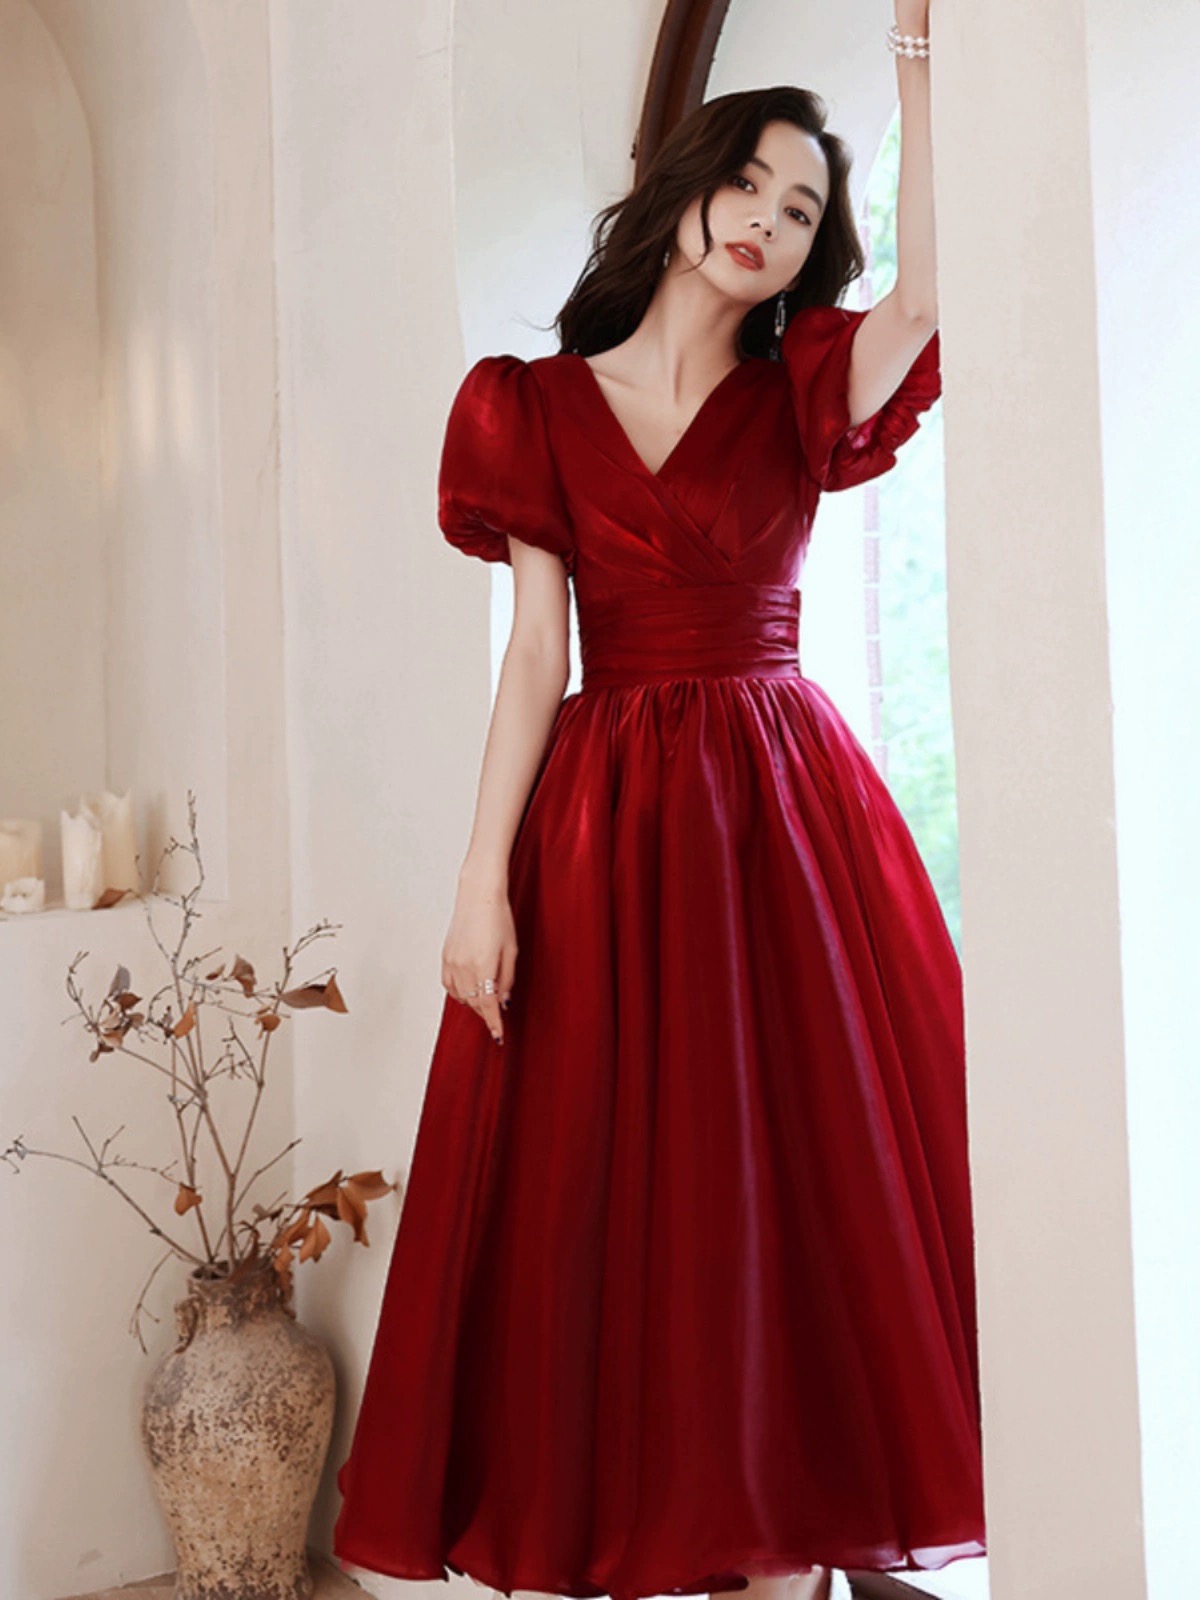 Red Evening Gown, Sweet Homecoming Dress,v-neck Prom Dress,cute Midi Dress